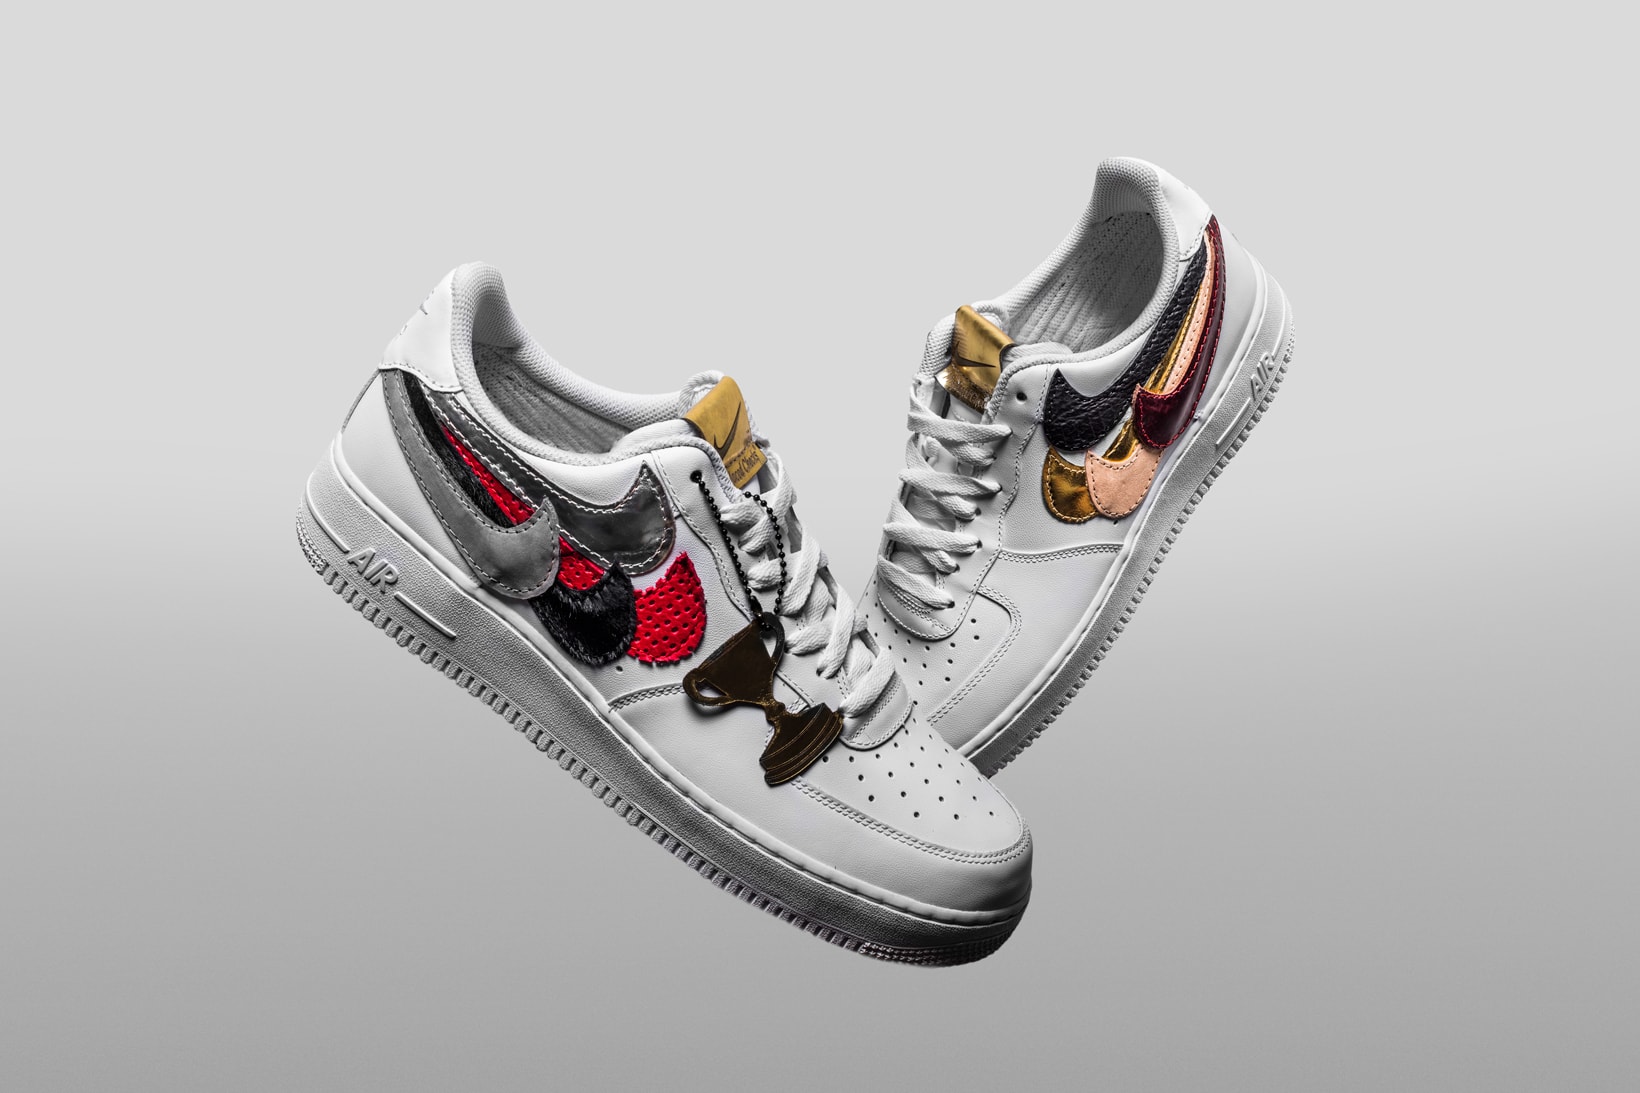 John Geiger The Shoe Surgeon Misplaced Checks Nike Air Force 1 low white swoosh high horween pony leather nubuck suede shark gold